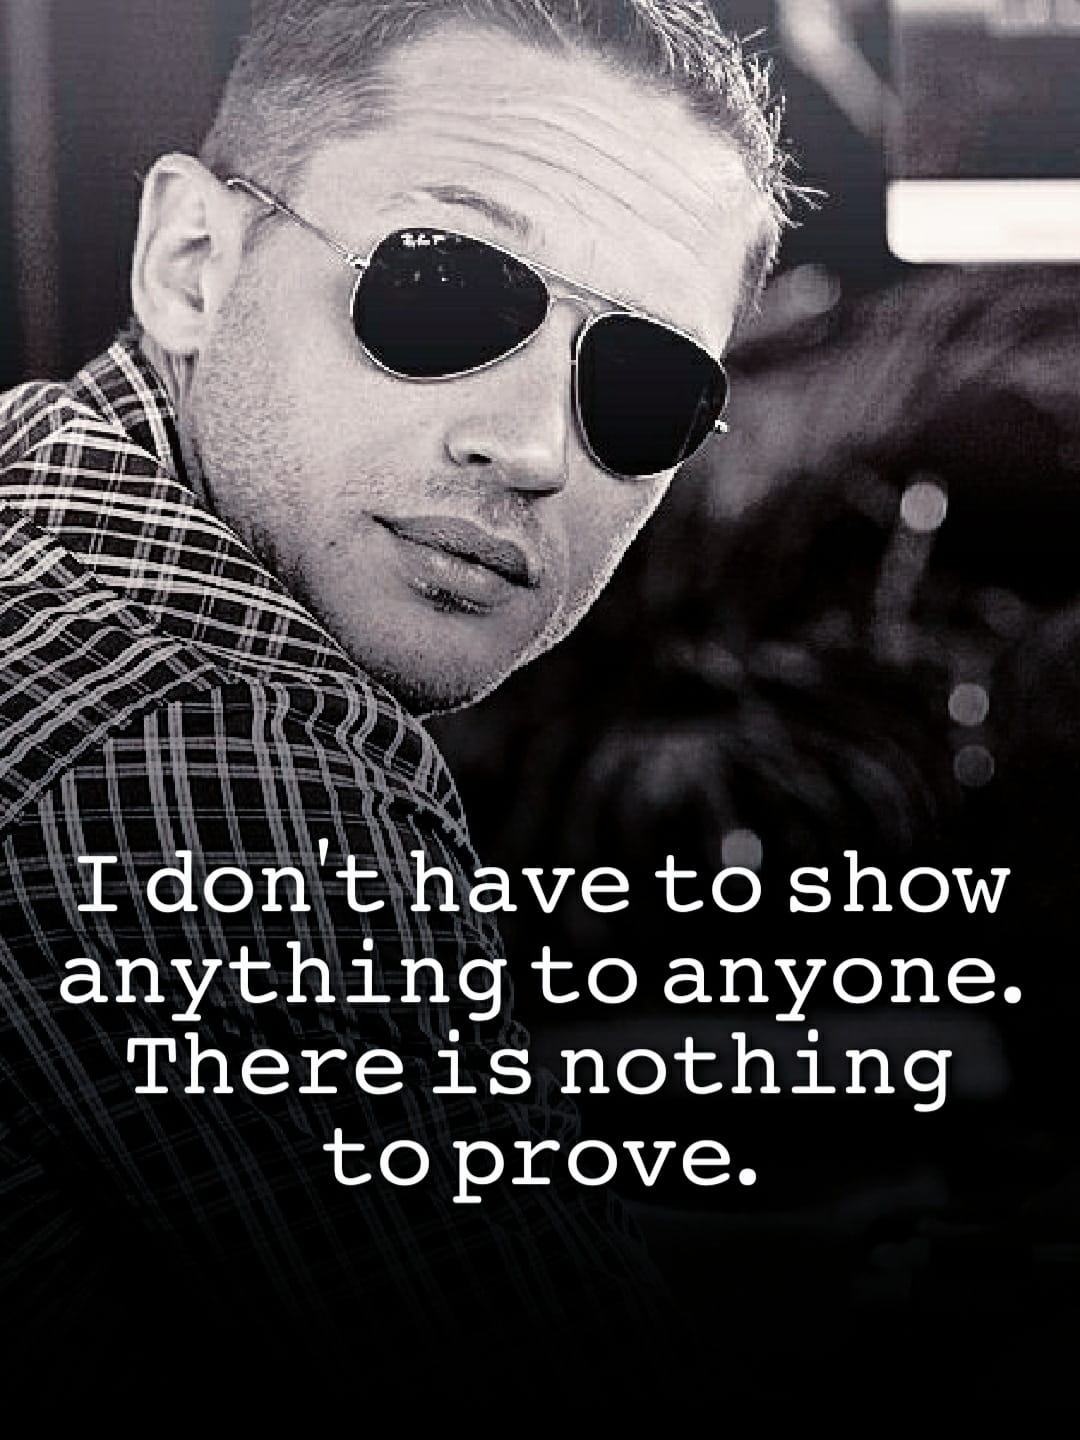 I don’t have to show anything to anyone. There is nothing to prove.